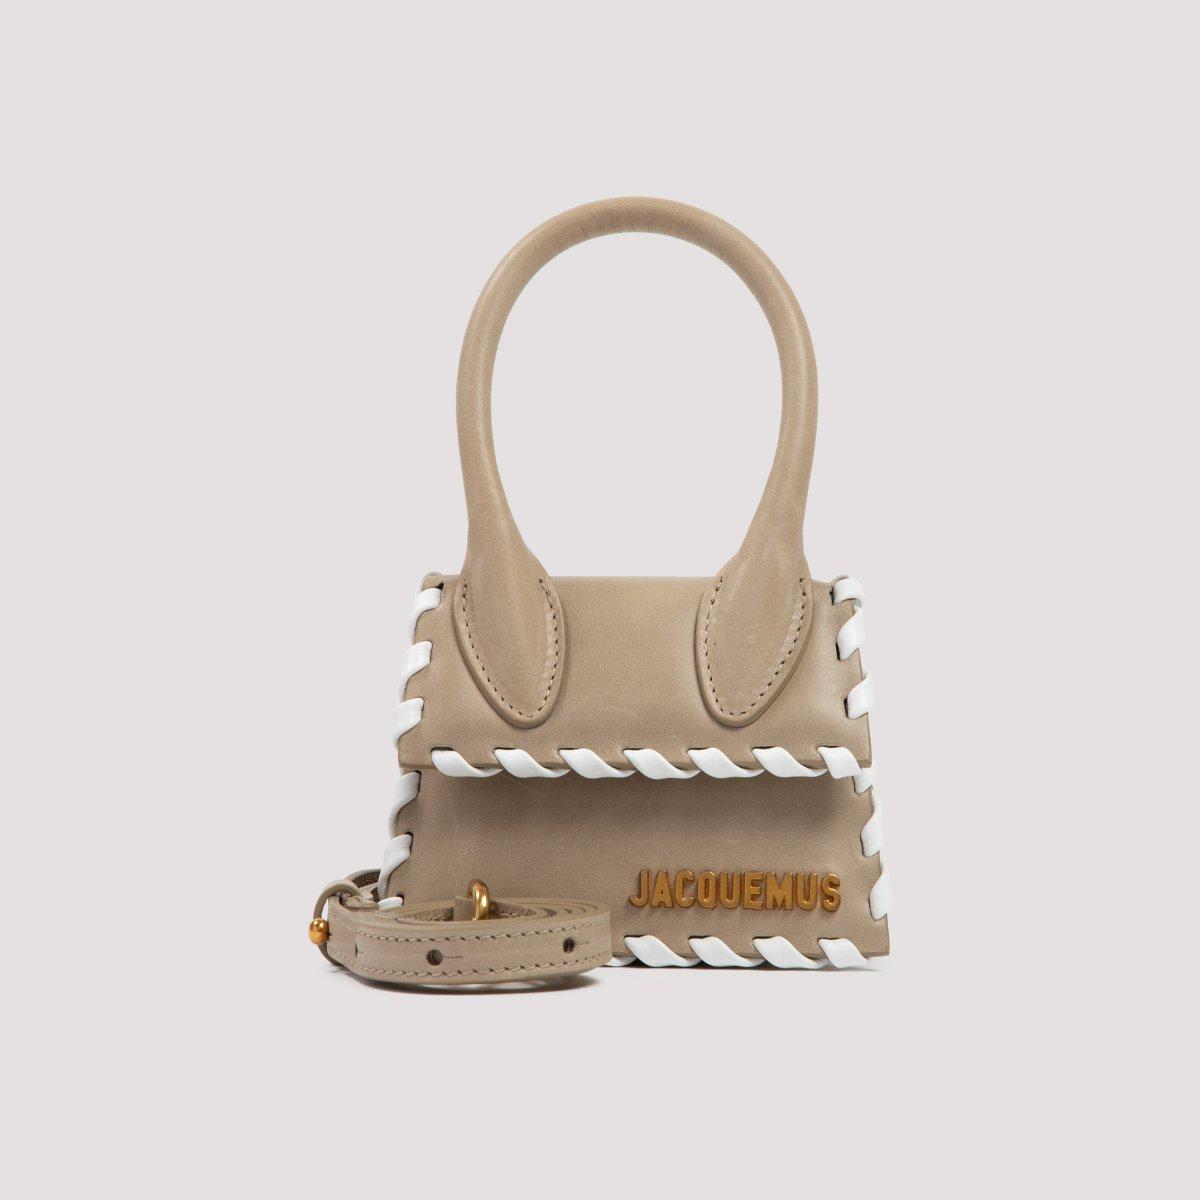 Jacquemus Le Chiquito Whipstitch Leather Top Handle Bag in Beige 